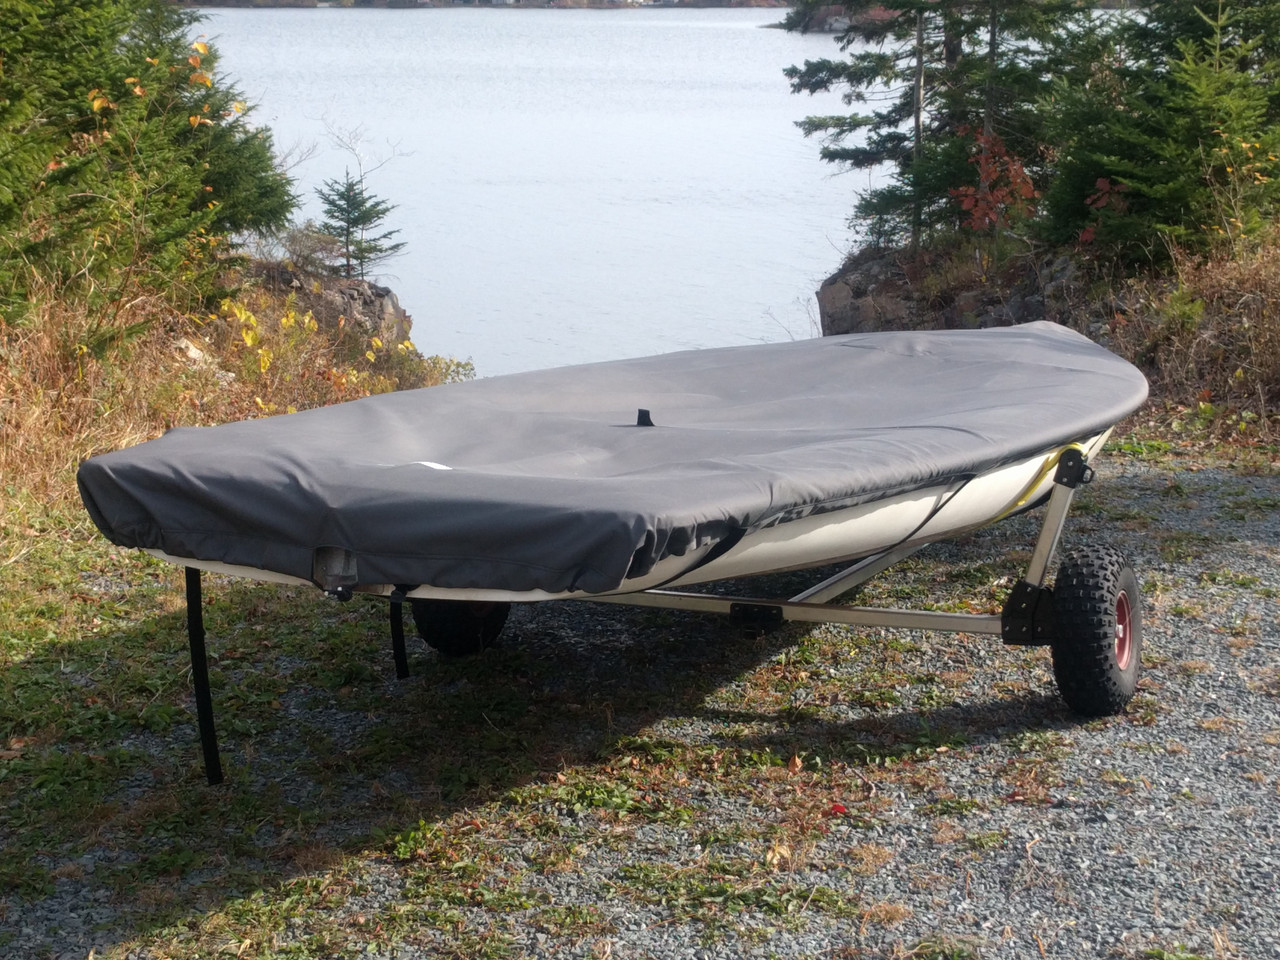 Protect your Bombardier Invitation from the elements while on shore or in storage with a long lasting boat cover from SLO Sail and Canvas. 